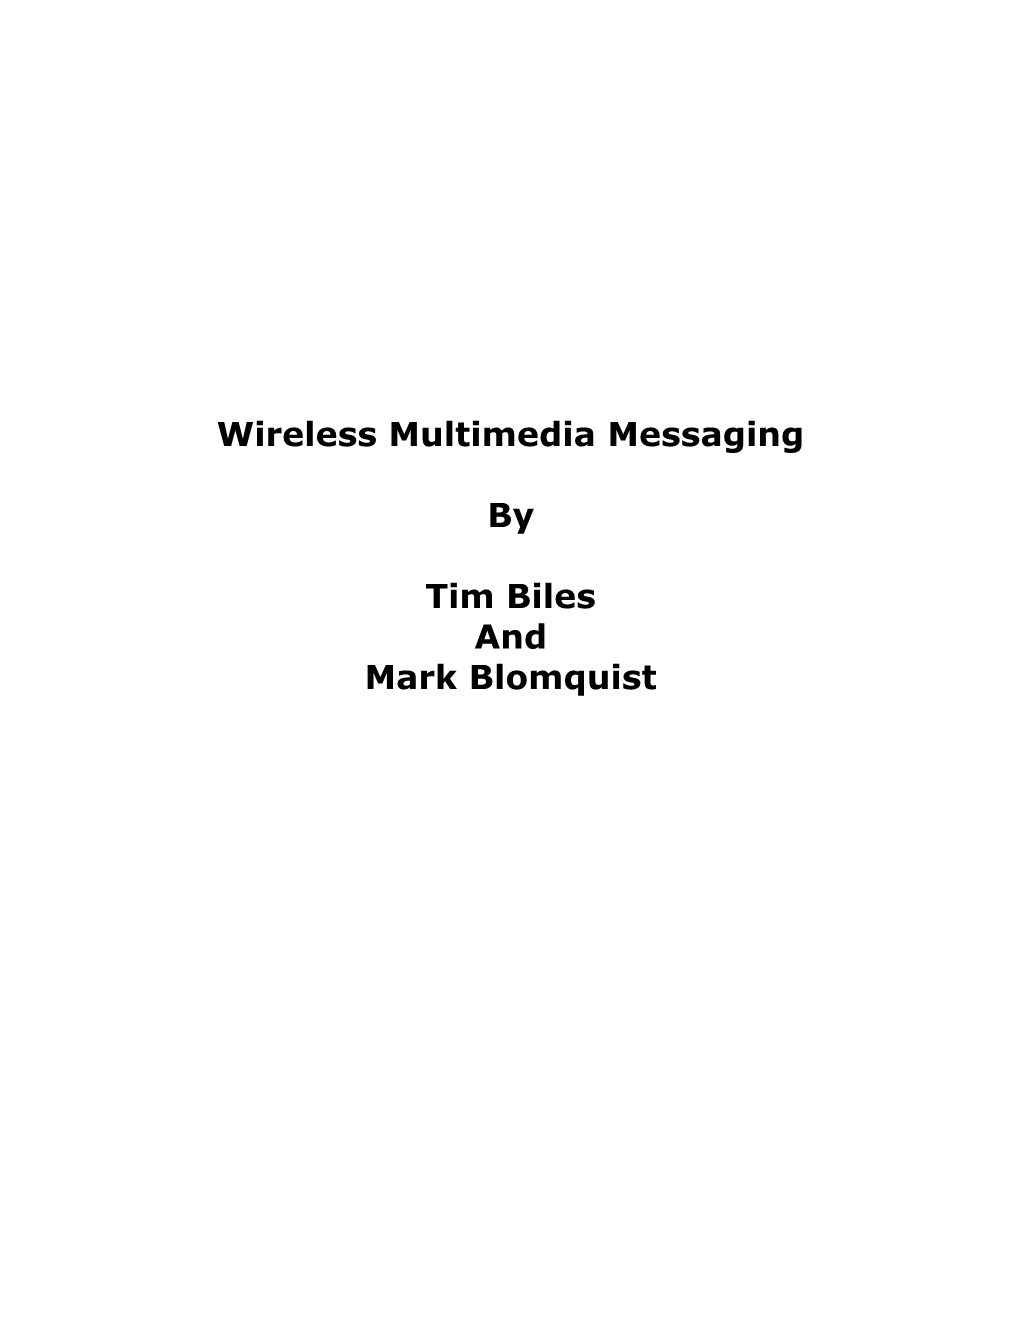 Wireless Network Programming Toolkit and Multimedia Messaging Services